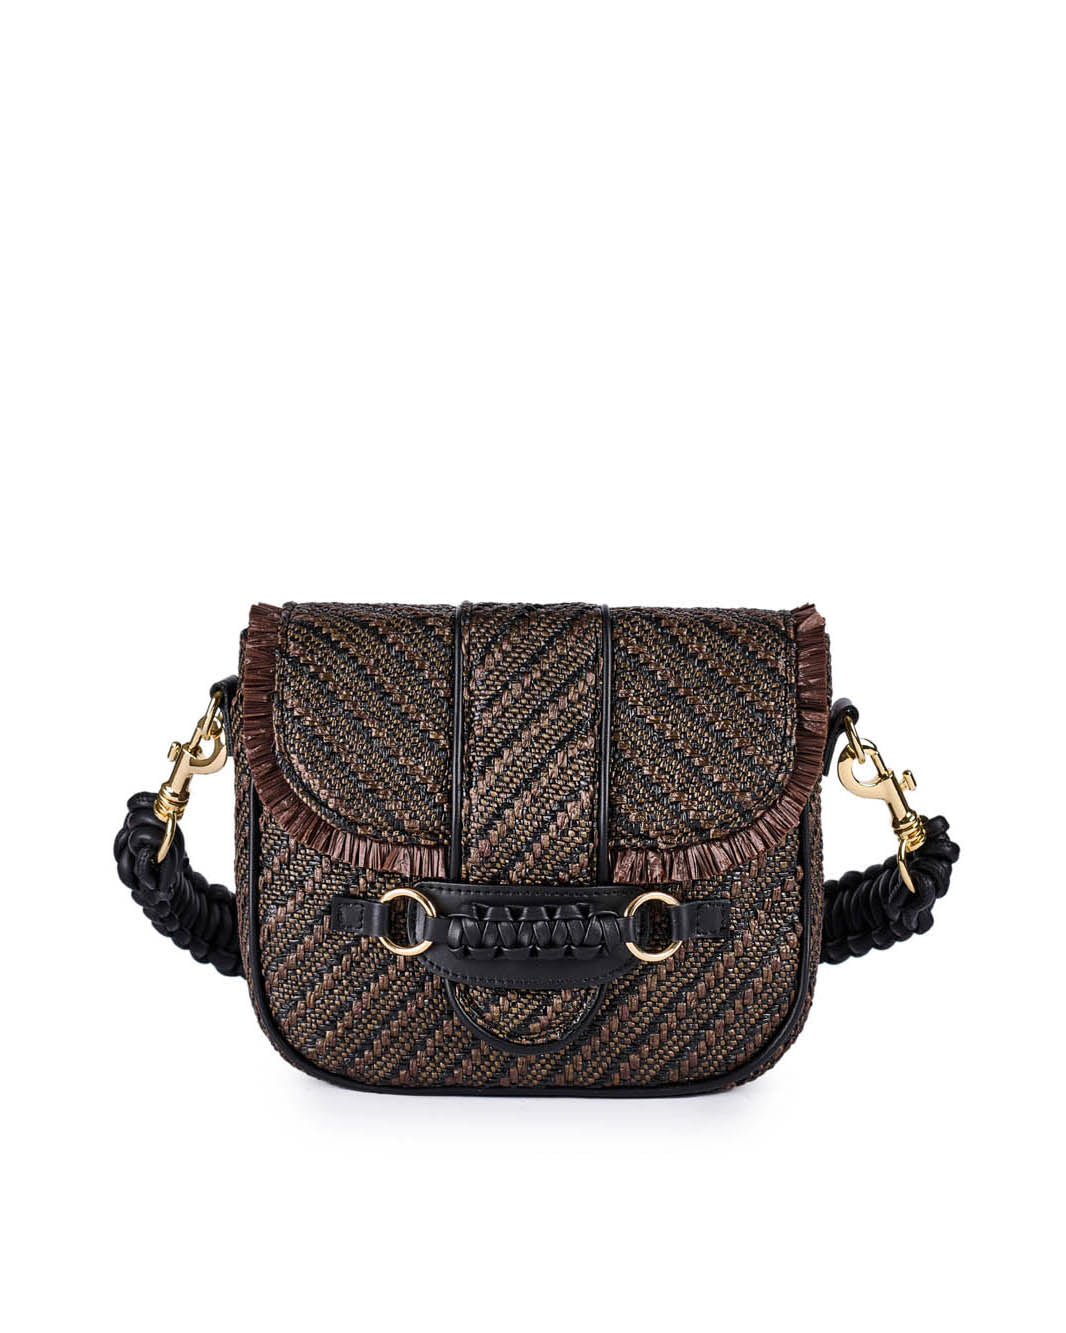 Elegant black and gold woven handbag with braided strap and gold hardware